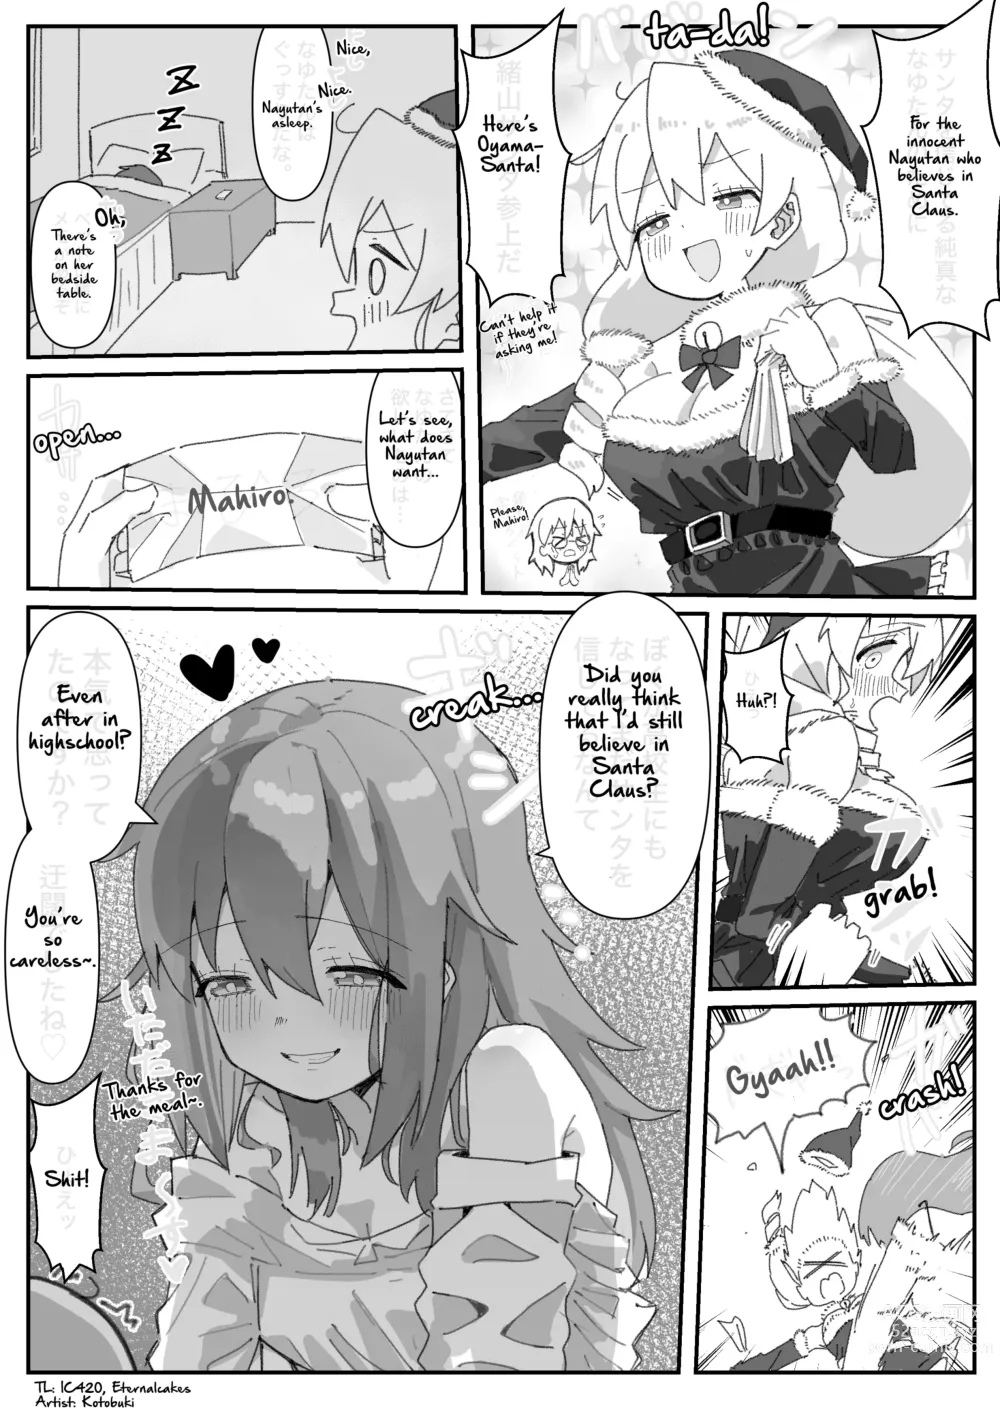 Page 5 of doujinshi Chocolate,Soldier][ fate grand order )